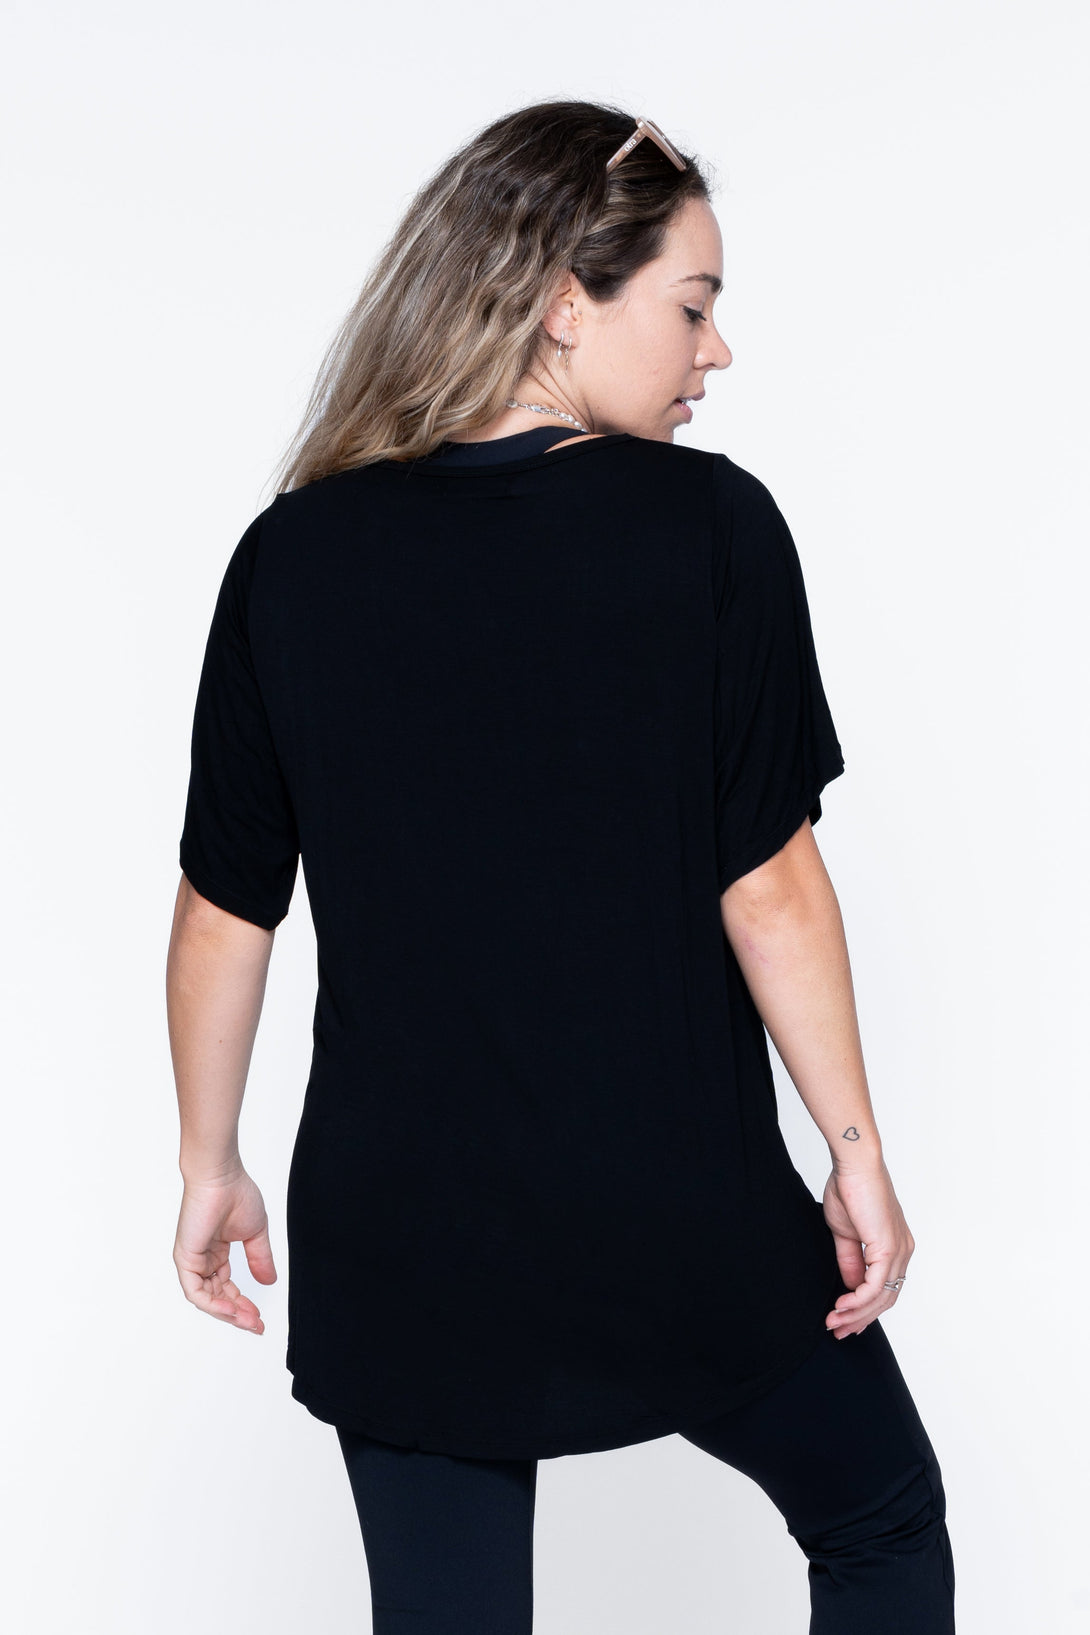 Black Slinky To Touch - Net V Front Boyfriend Tee-Activewear-Exoticathletica